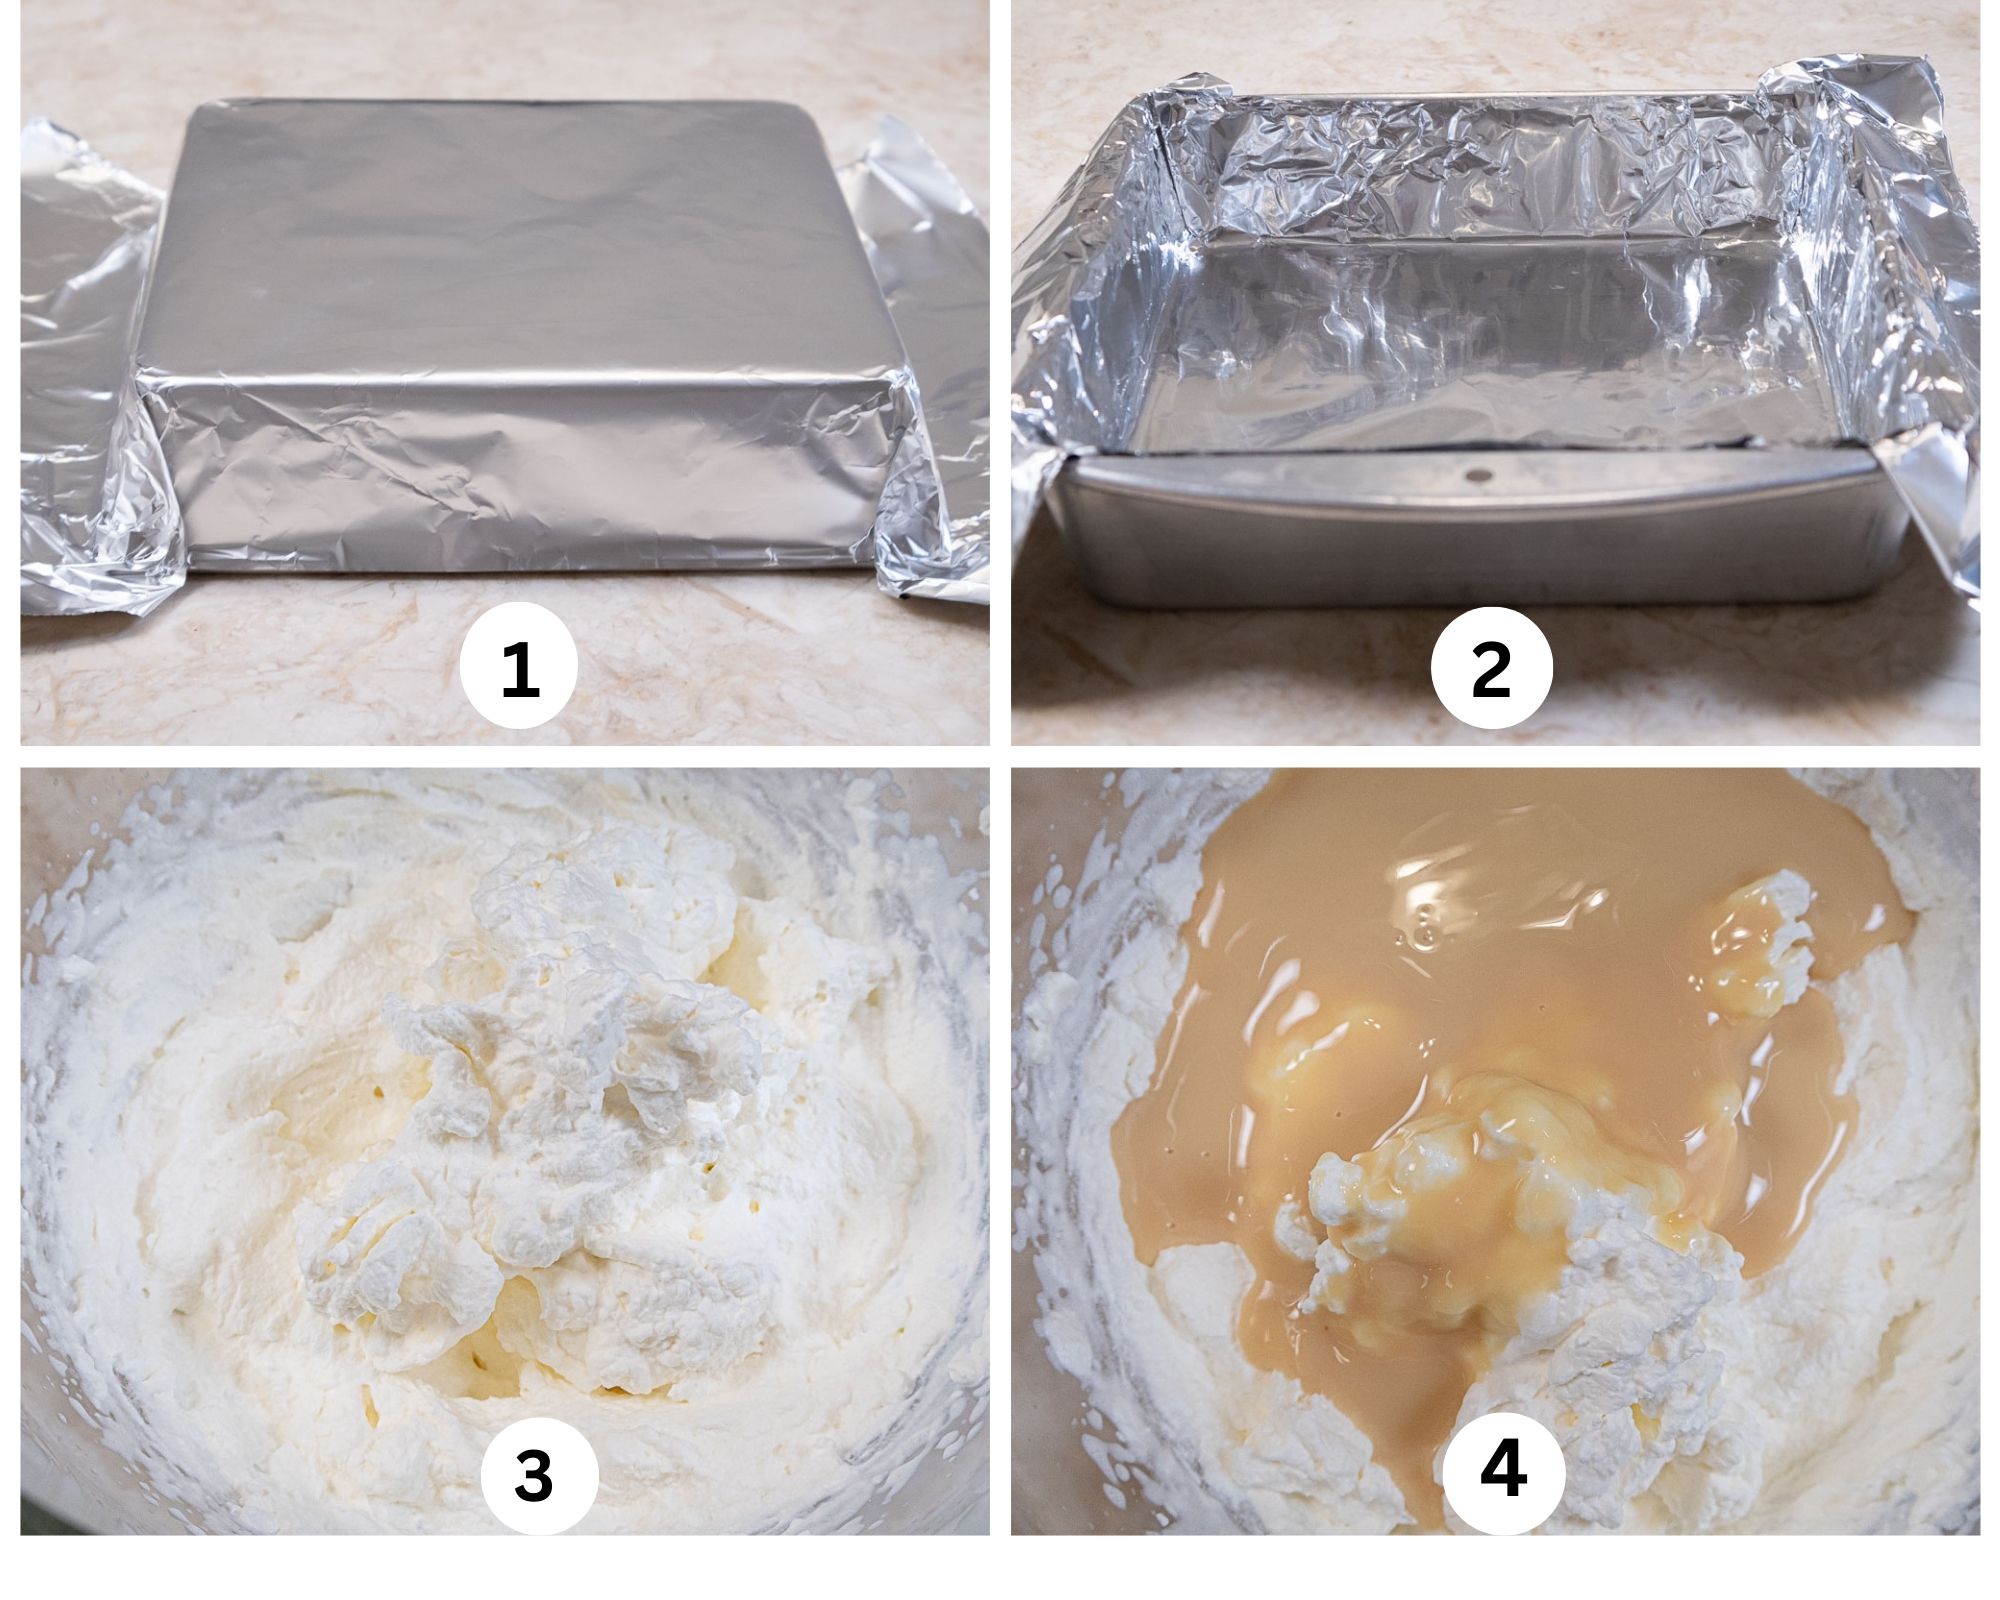 The first collage shows a 9x9 inch square pan being covered on the bottom with foil, the foil is then put inside the pan, the cream whipped and the condensed milk added to it.